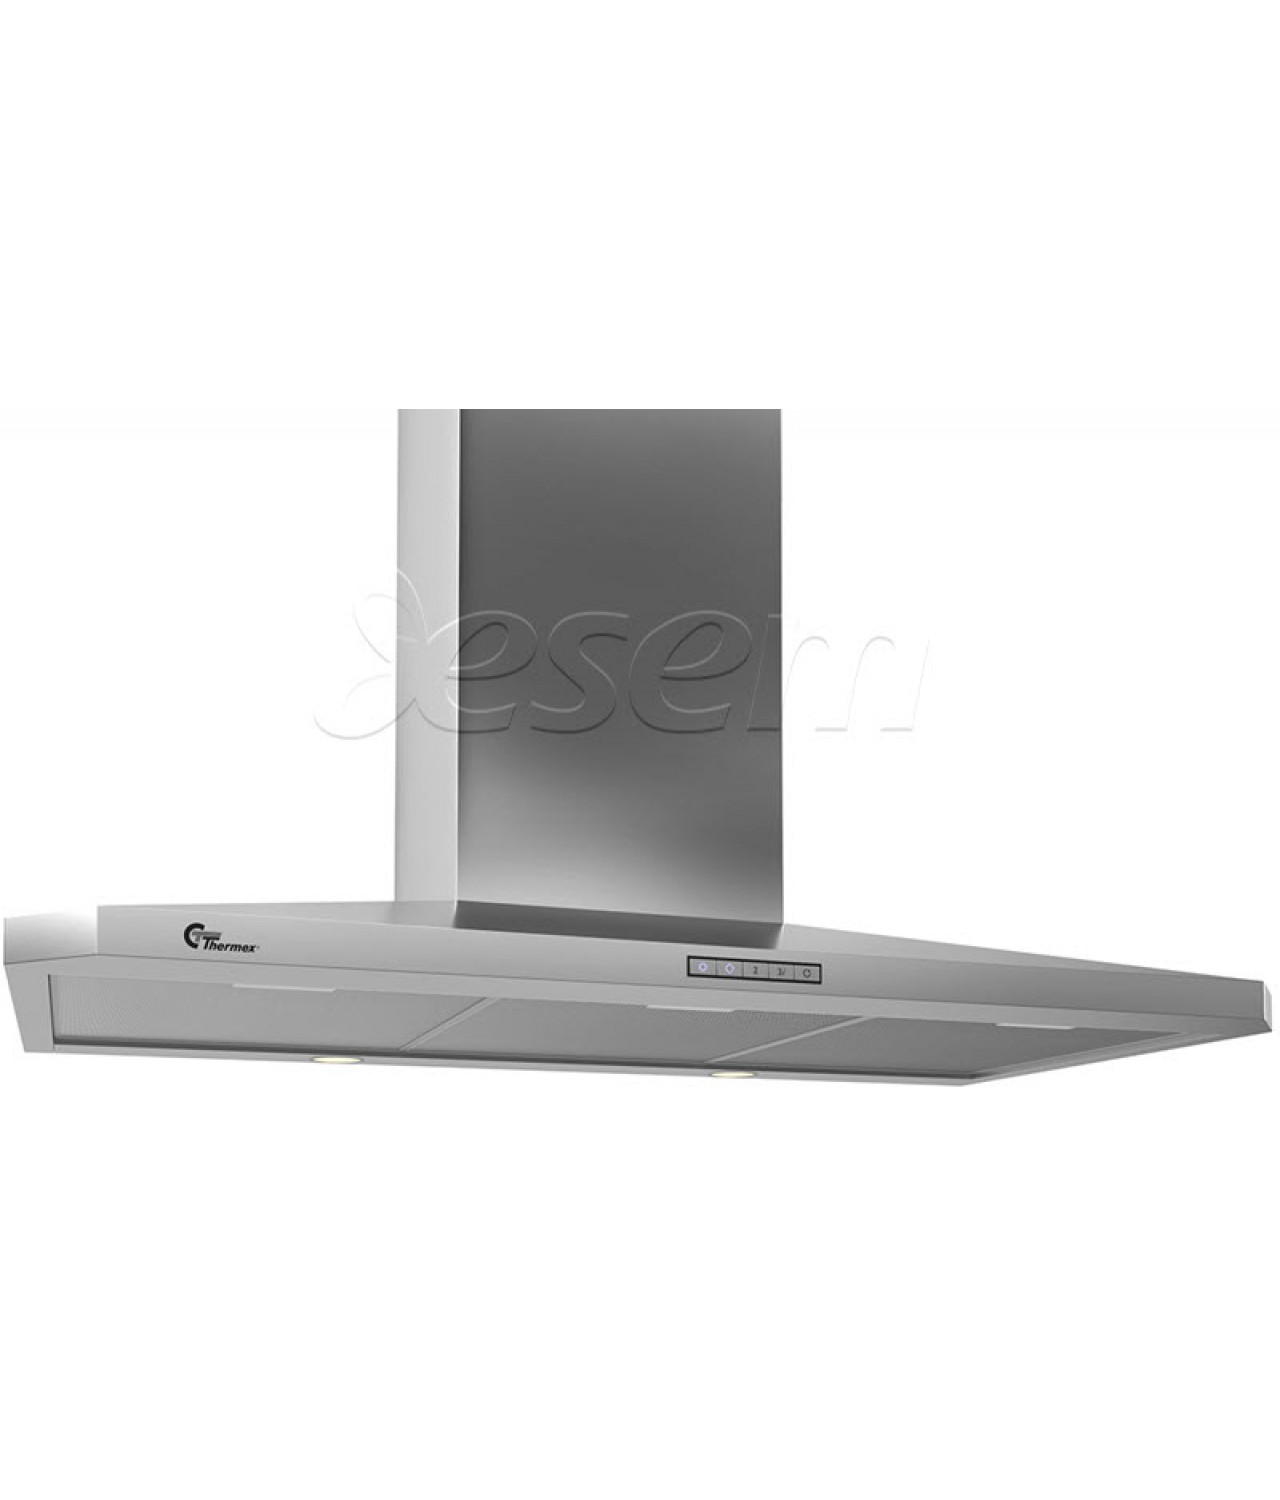 Wall mounted cooker hoods Decor 787 stainless steel 900 mm without motor